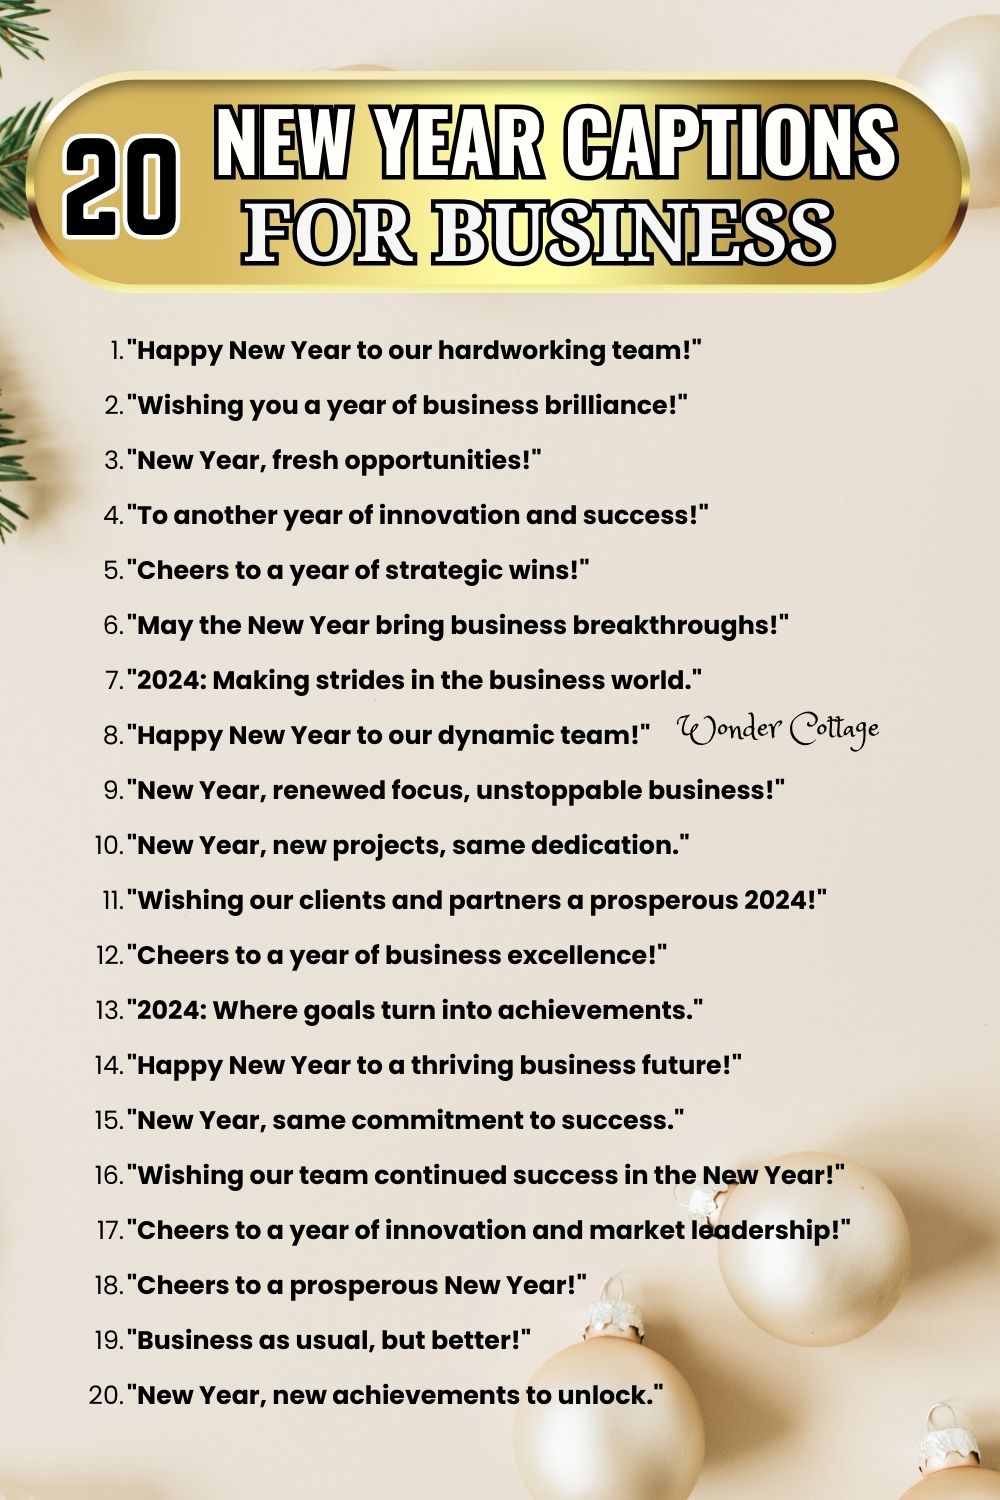 New Year Captions For Business